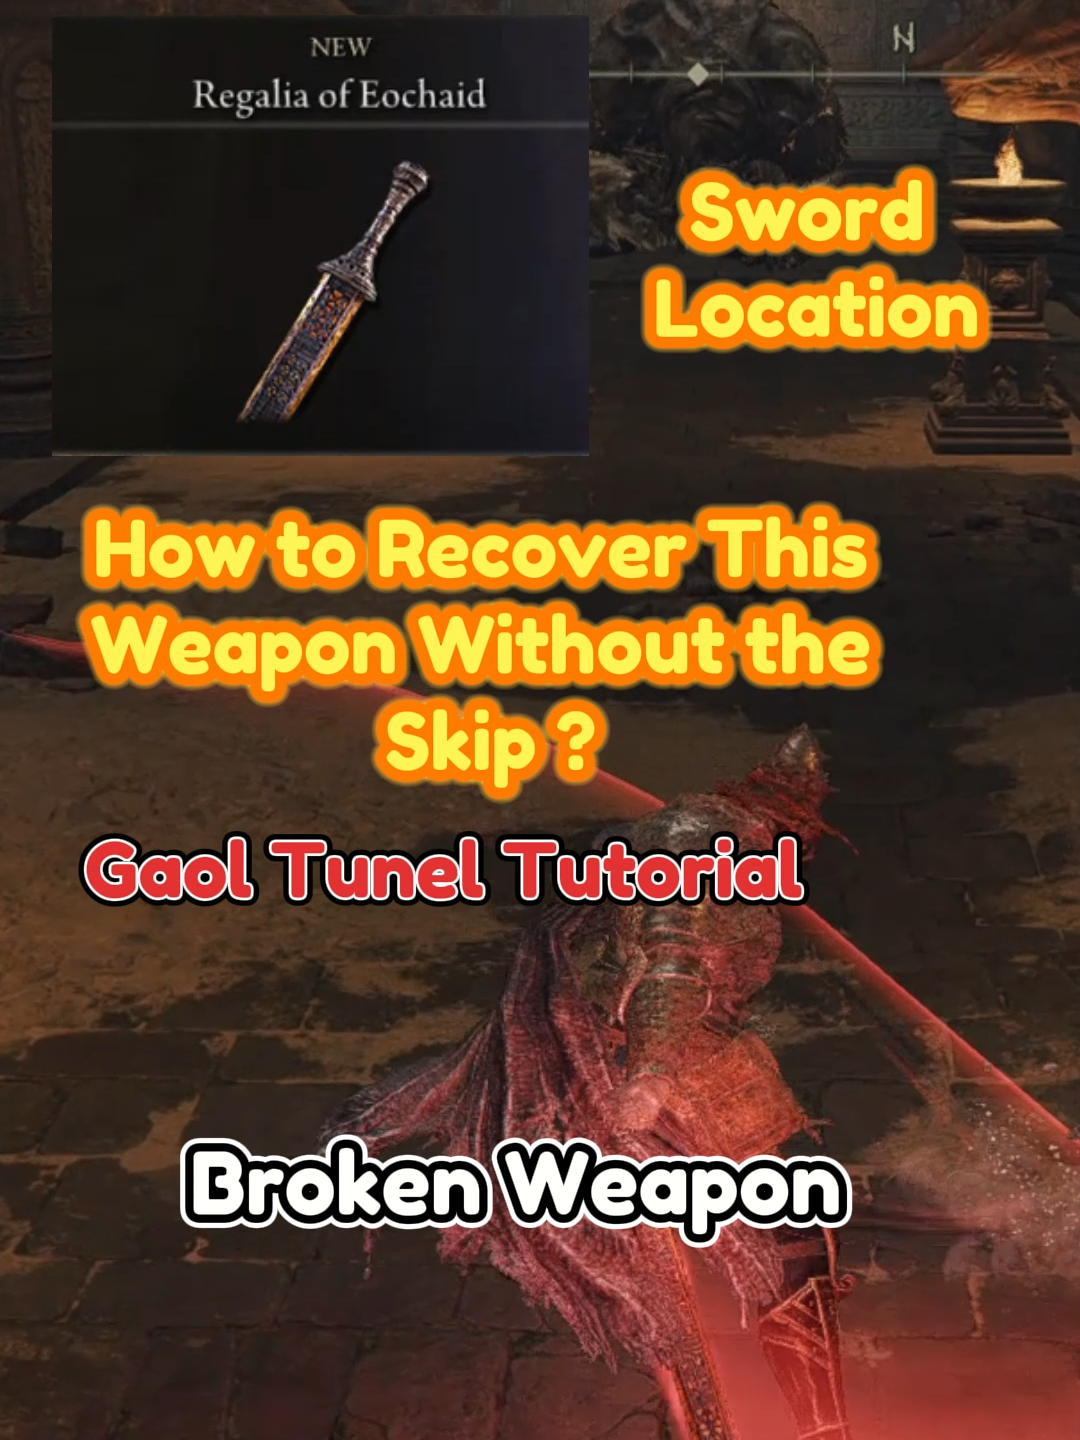 Regal of Eochaid No Skip Location Elden Ring - Gaol Cave Tutorial, Legendary Sword Location, how to get regal of eochaid easily and quickly ? elden ring tips and location to recover this weapon without the skip in limgrave, you will have to go to caelid and complete the dungeon 